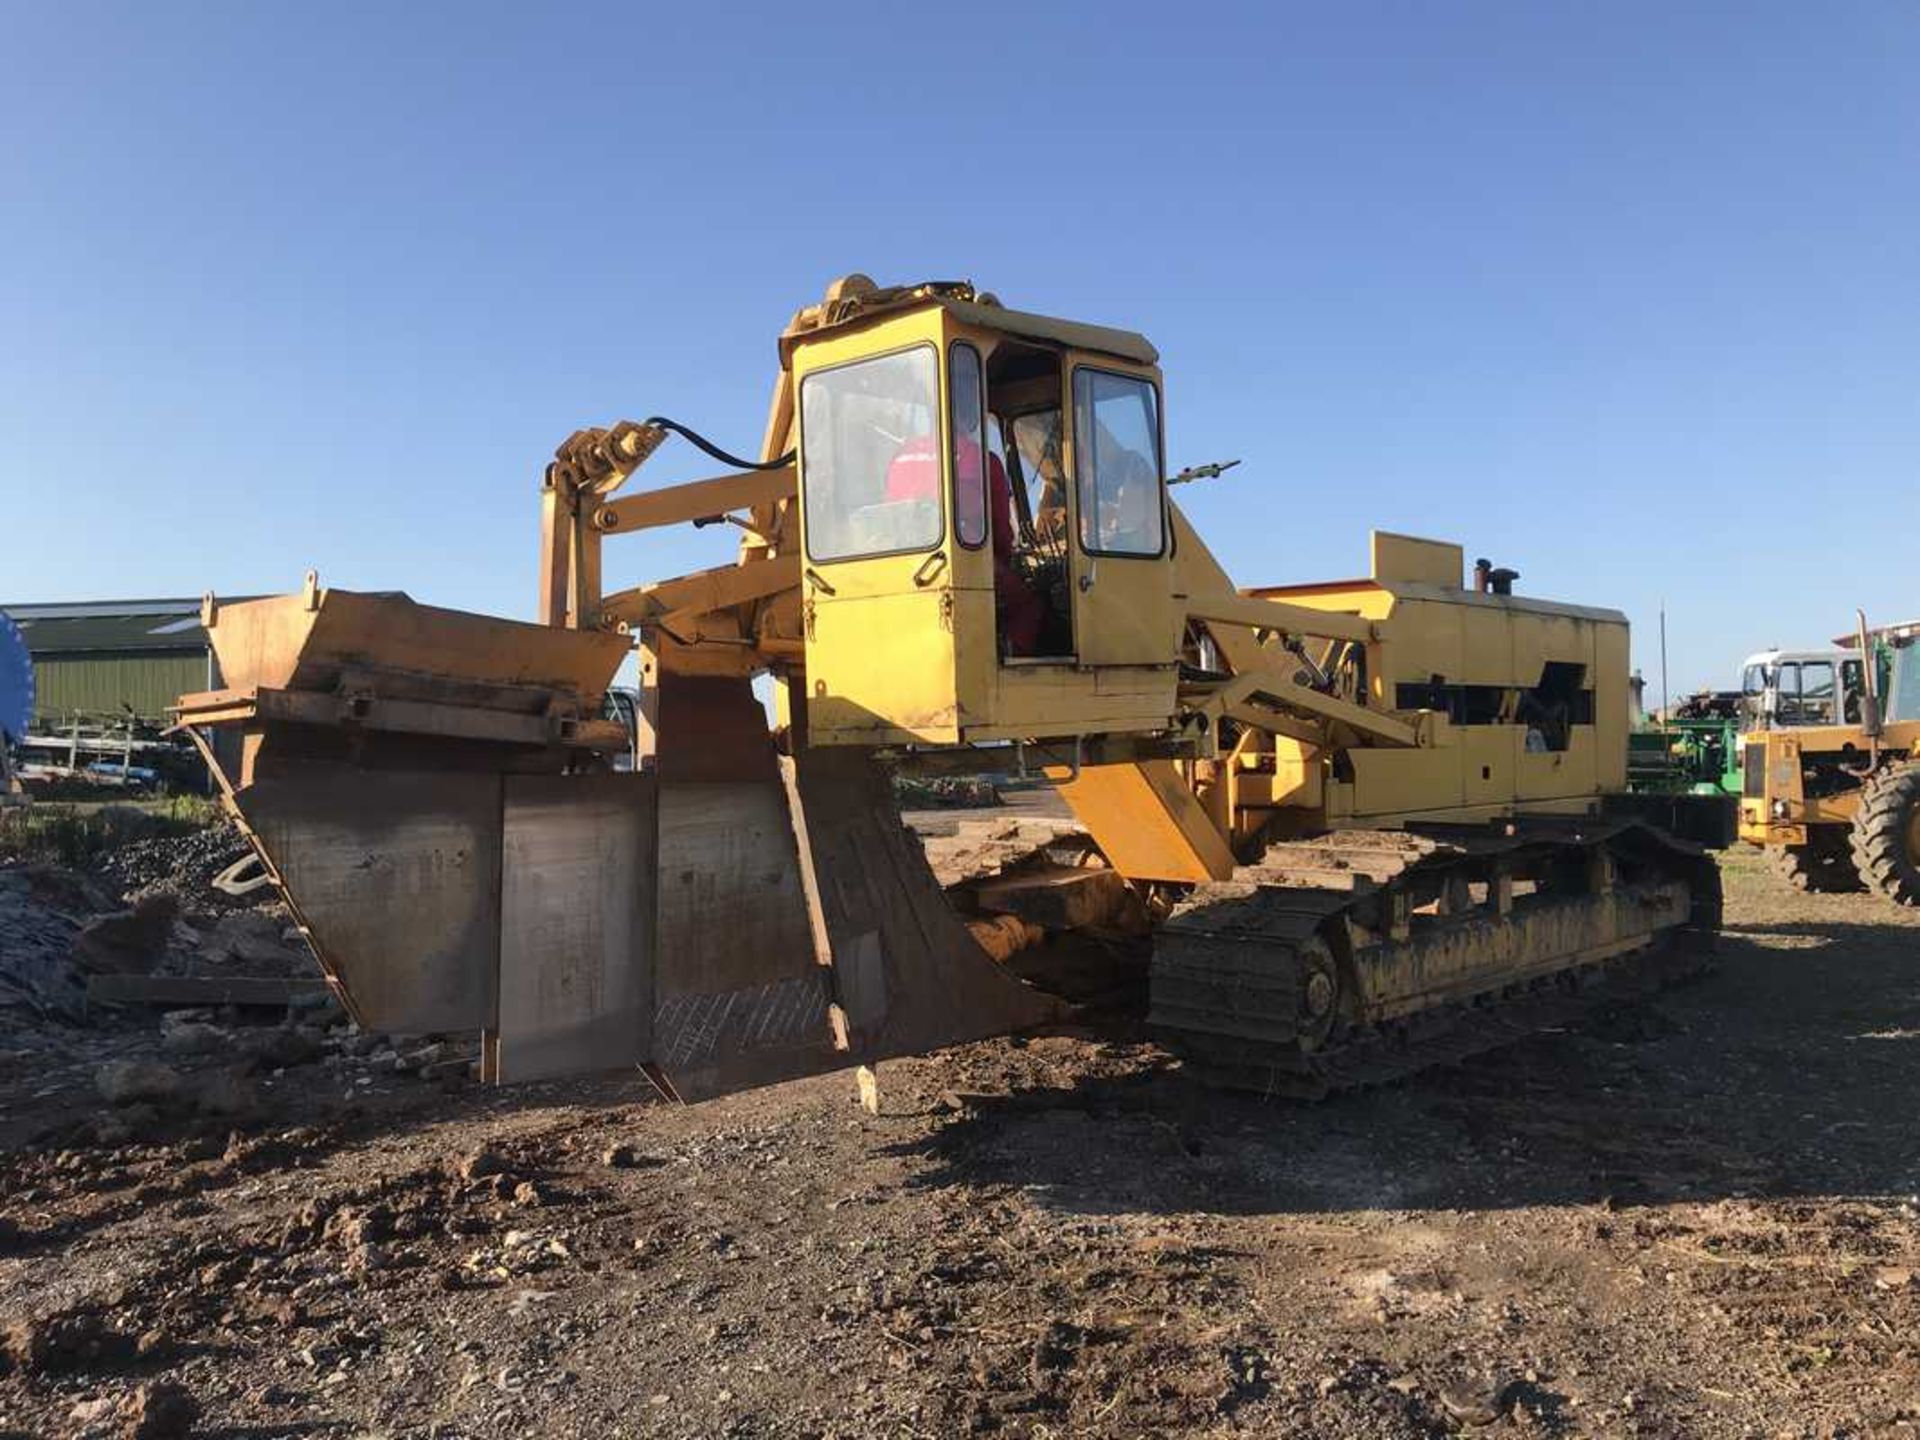 1984 INTER-DRAIN LTD Trenchless. Model 2032GP. S/N D84051. Tracked trencher. Trimble laser control s